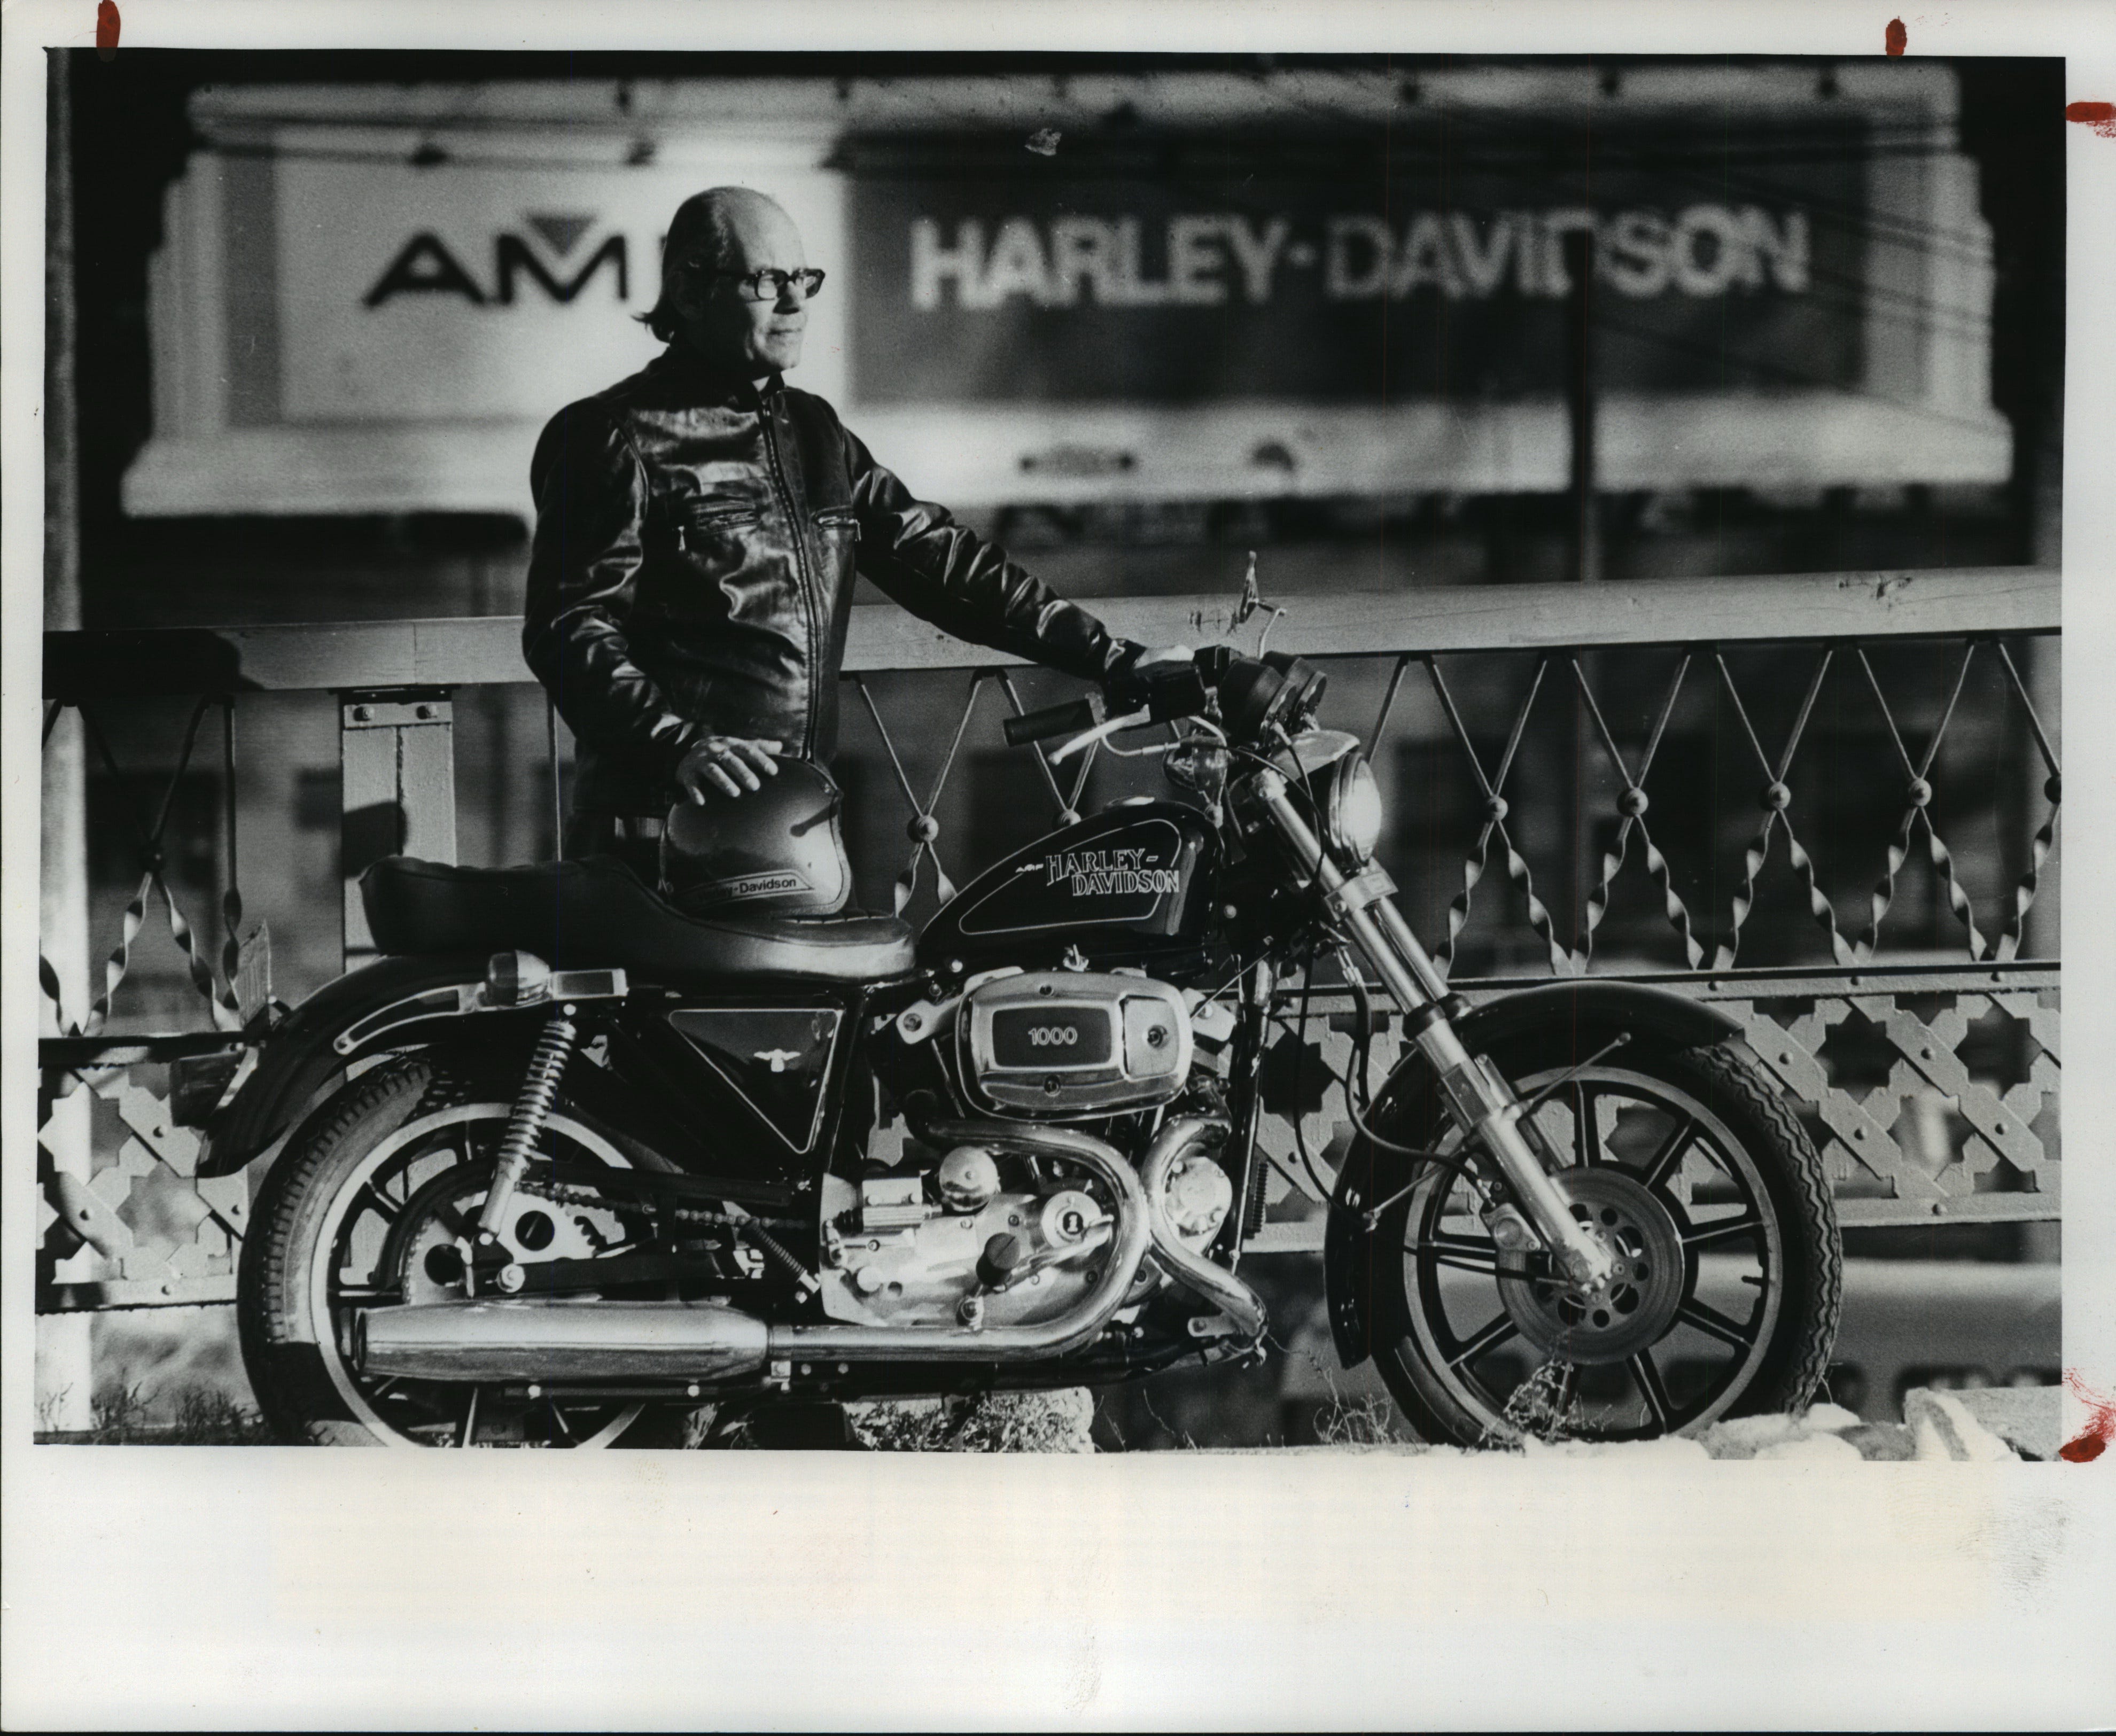 Faced with a hostile takeover, Harley-Davidson looked for help, and found AMF